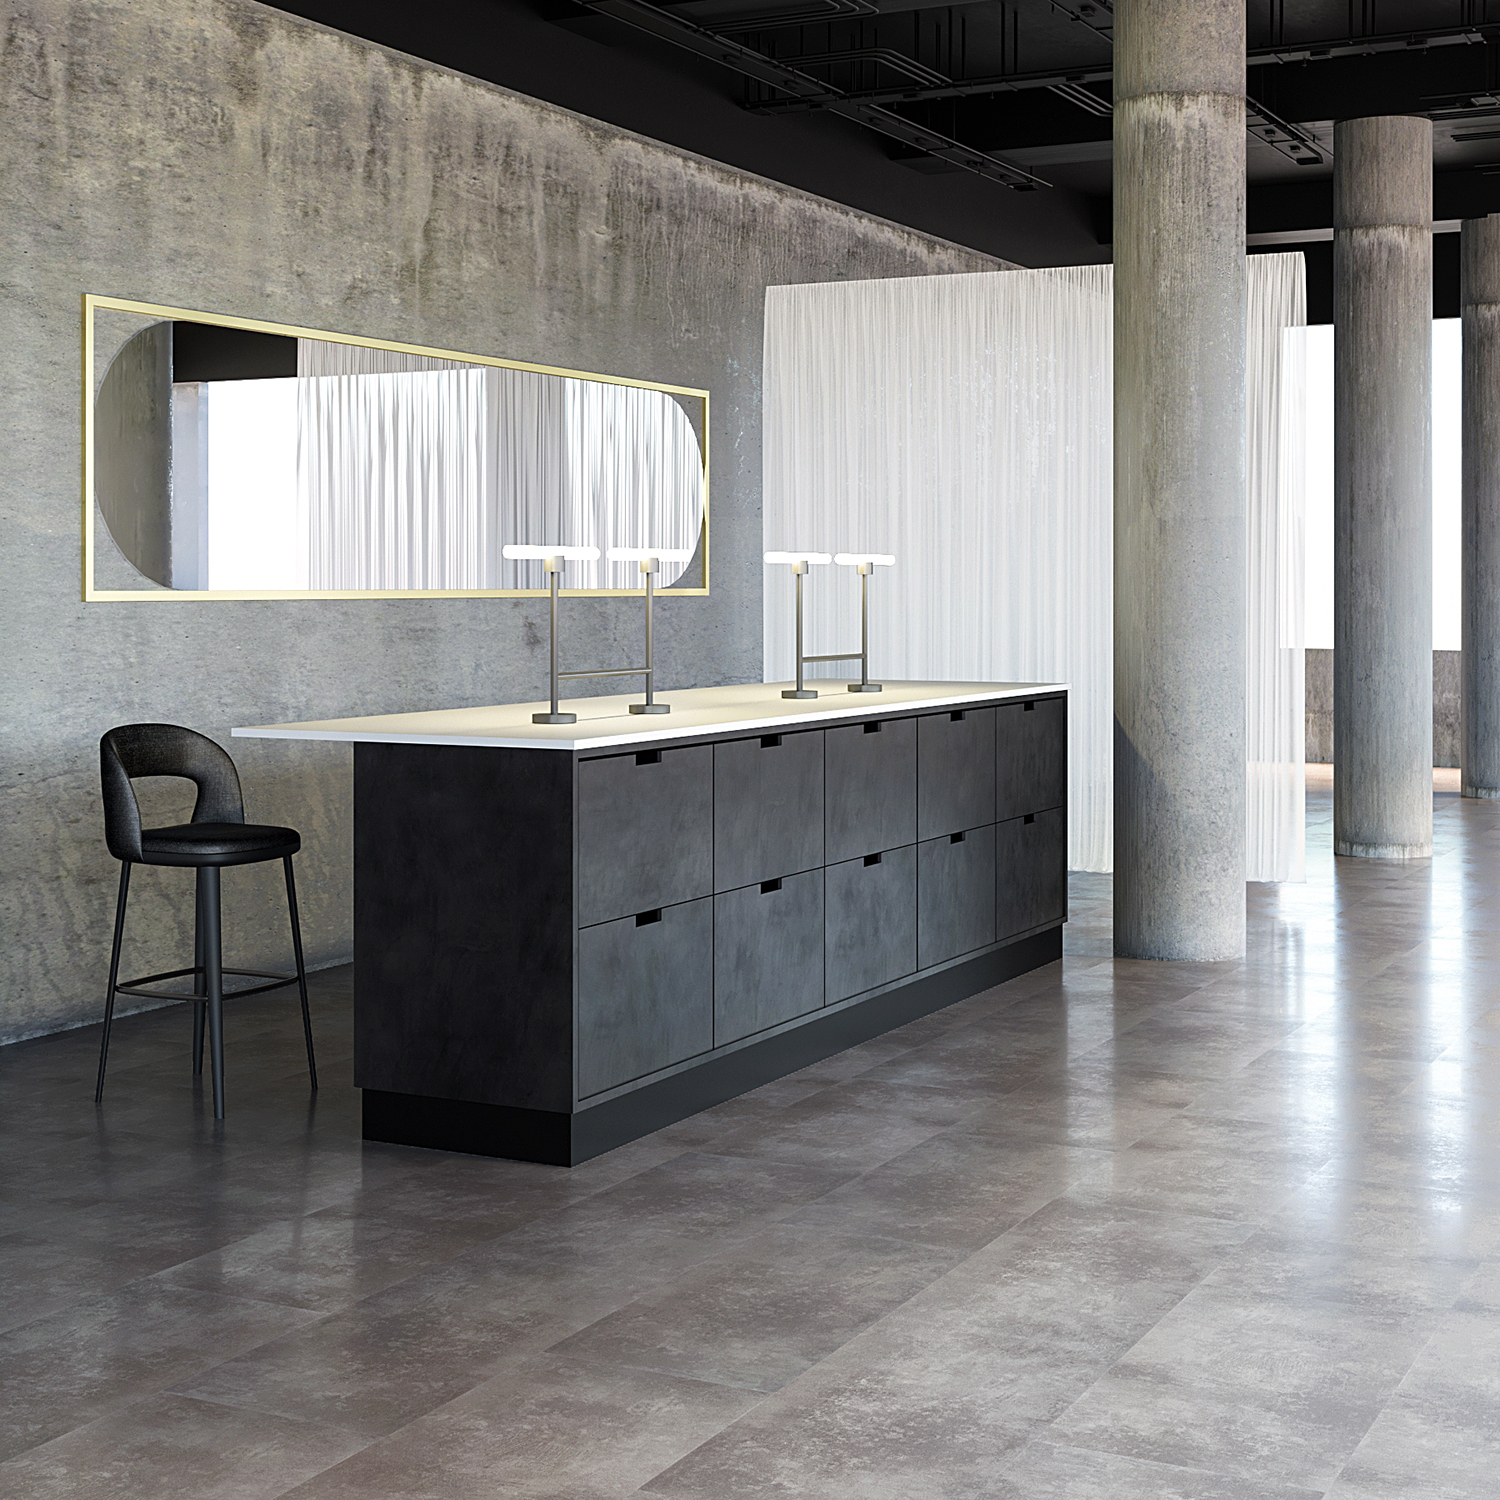 Concrete look floor and wall tiles in modern setting